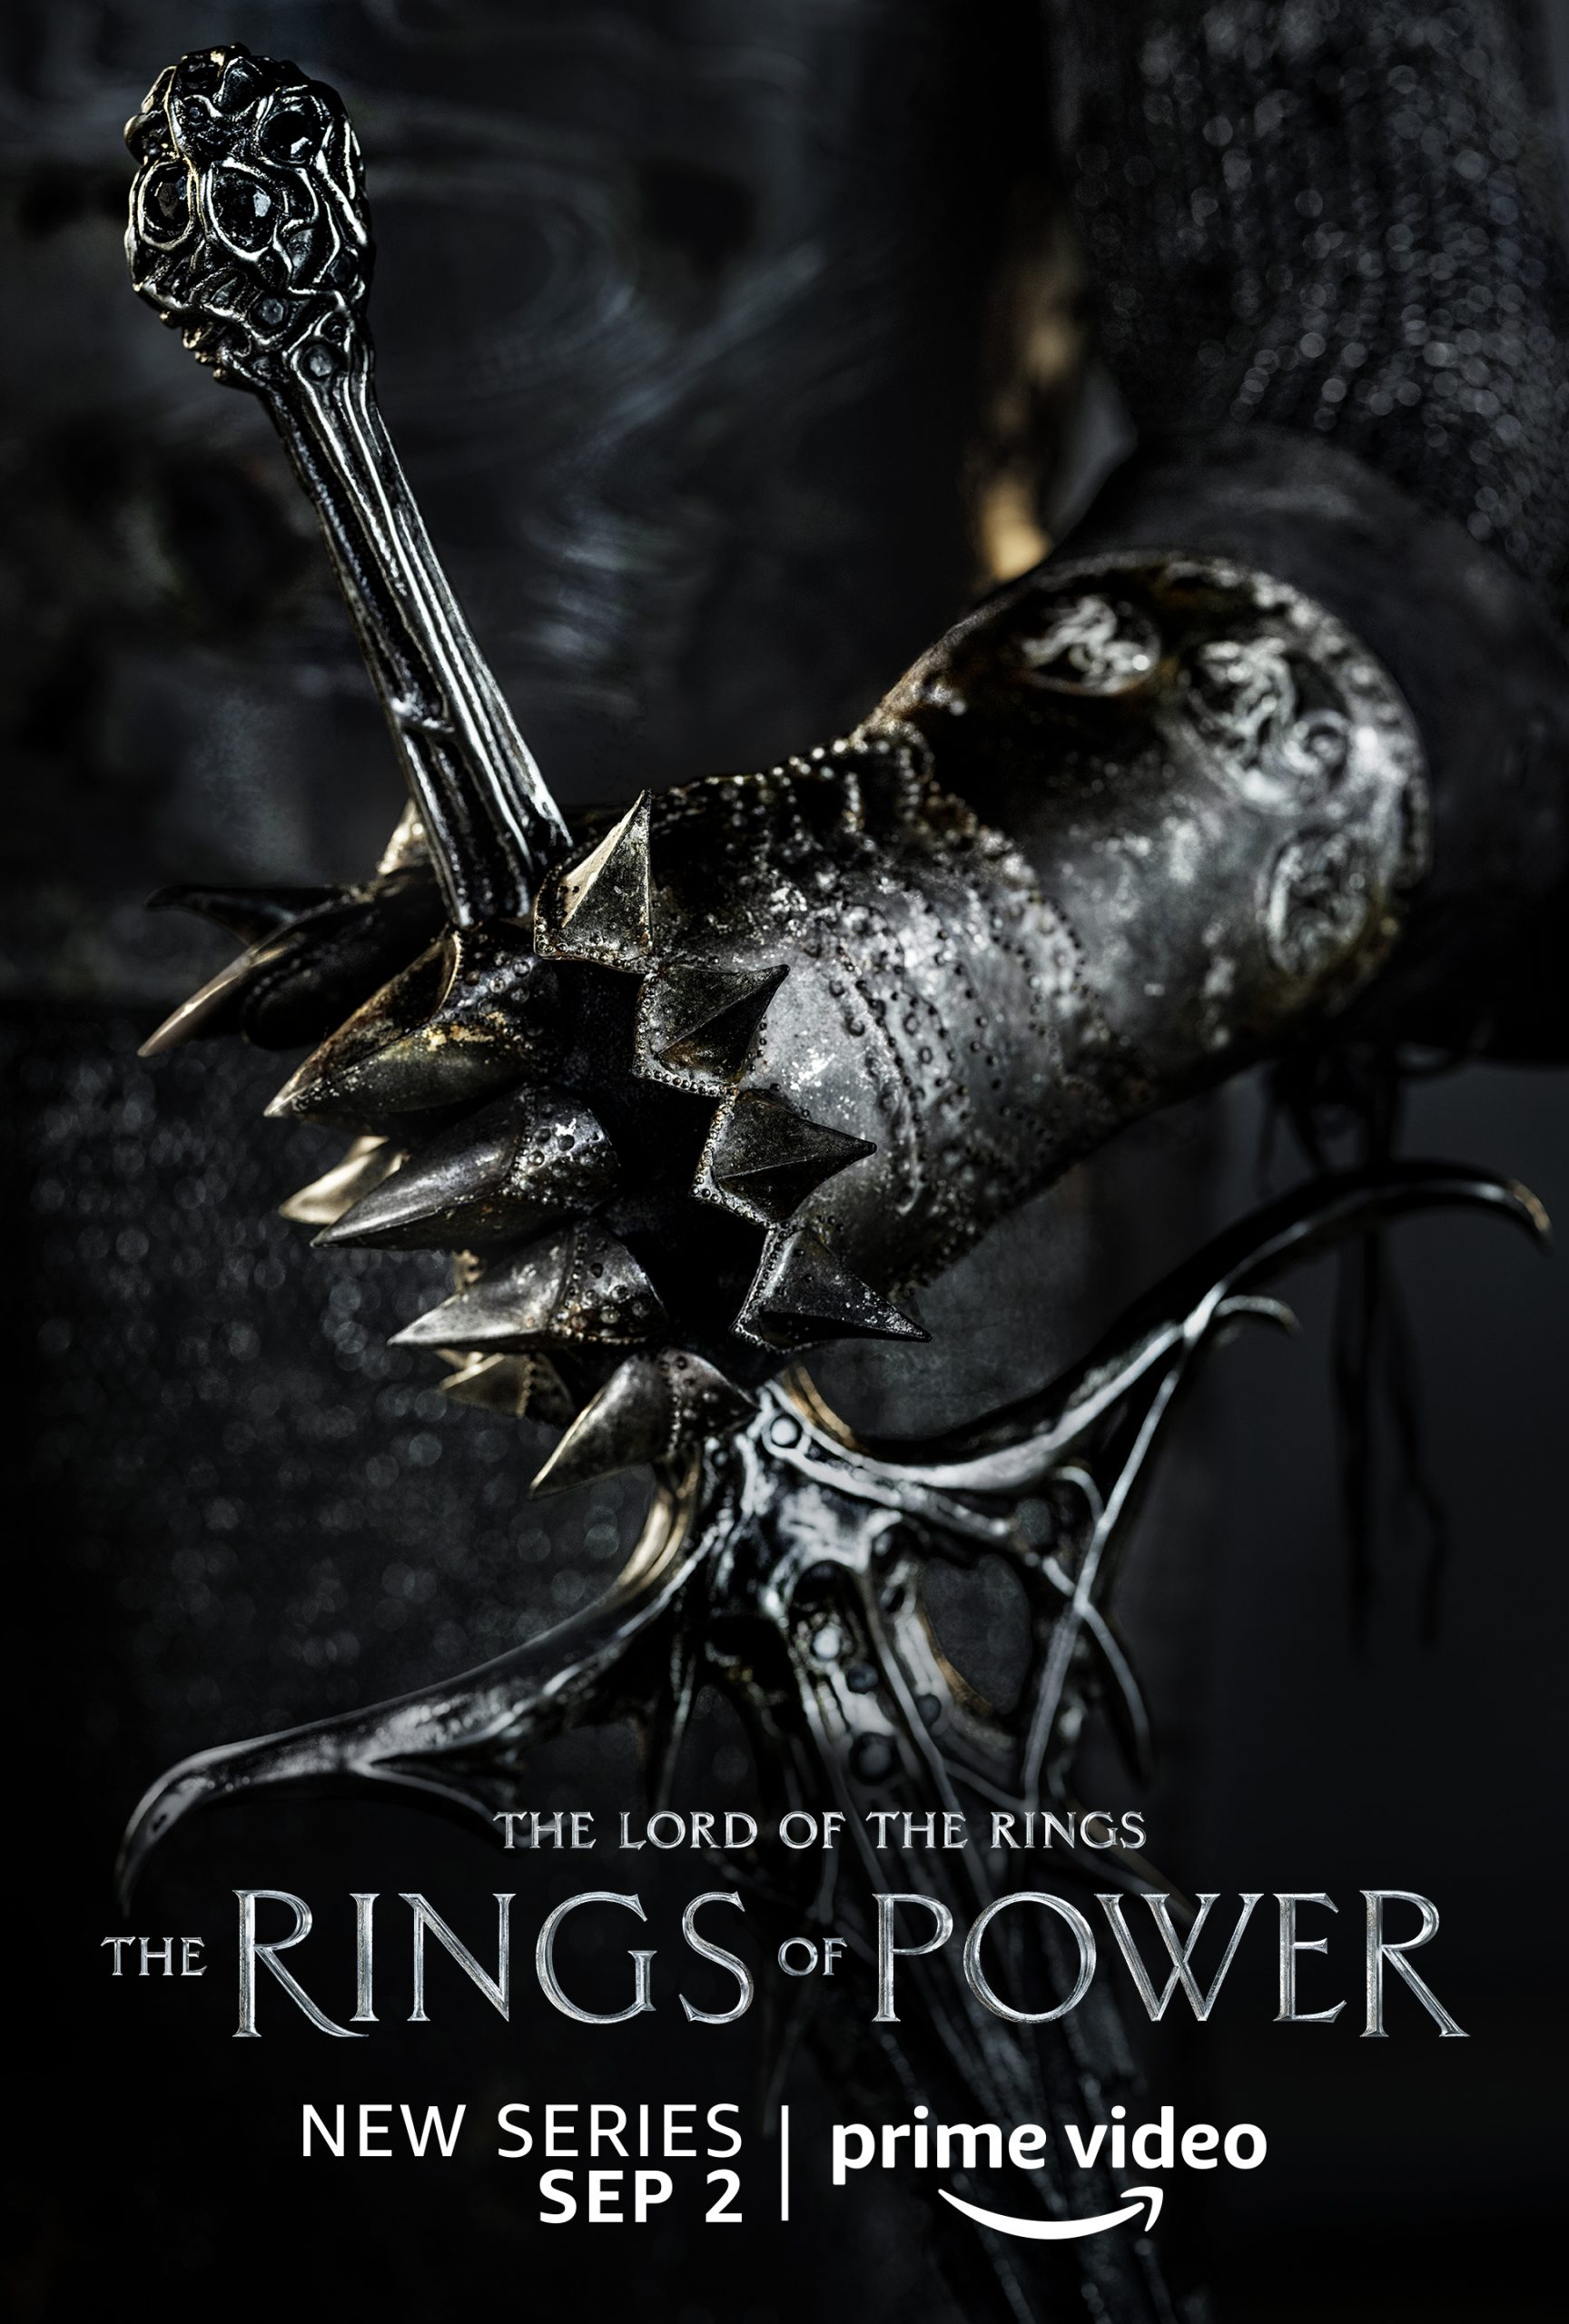 The Lord of the Rings: The Rings of Power (2022), on Amazon Prime Video